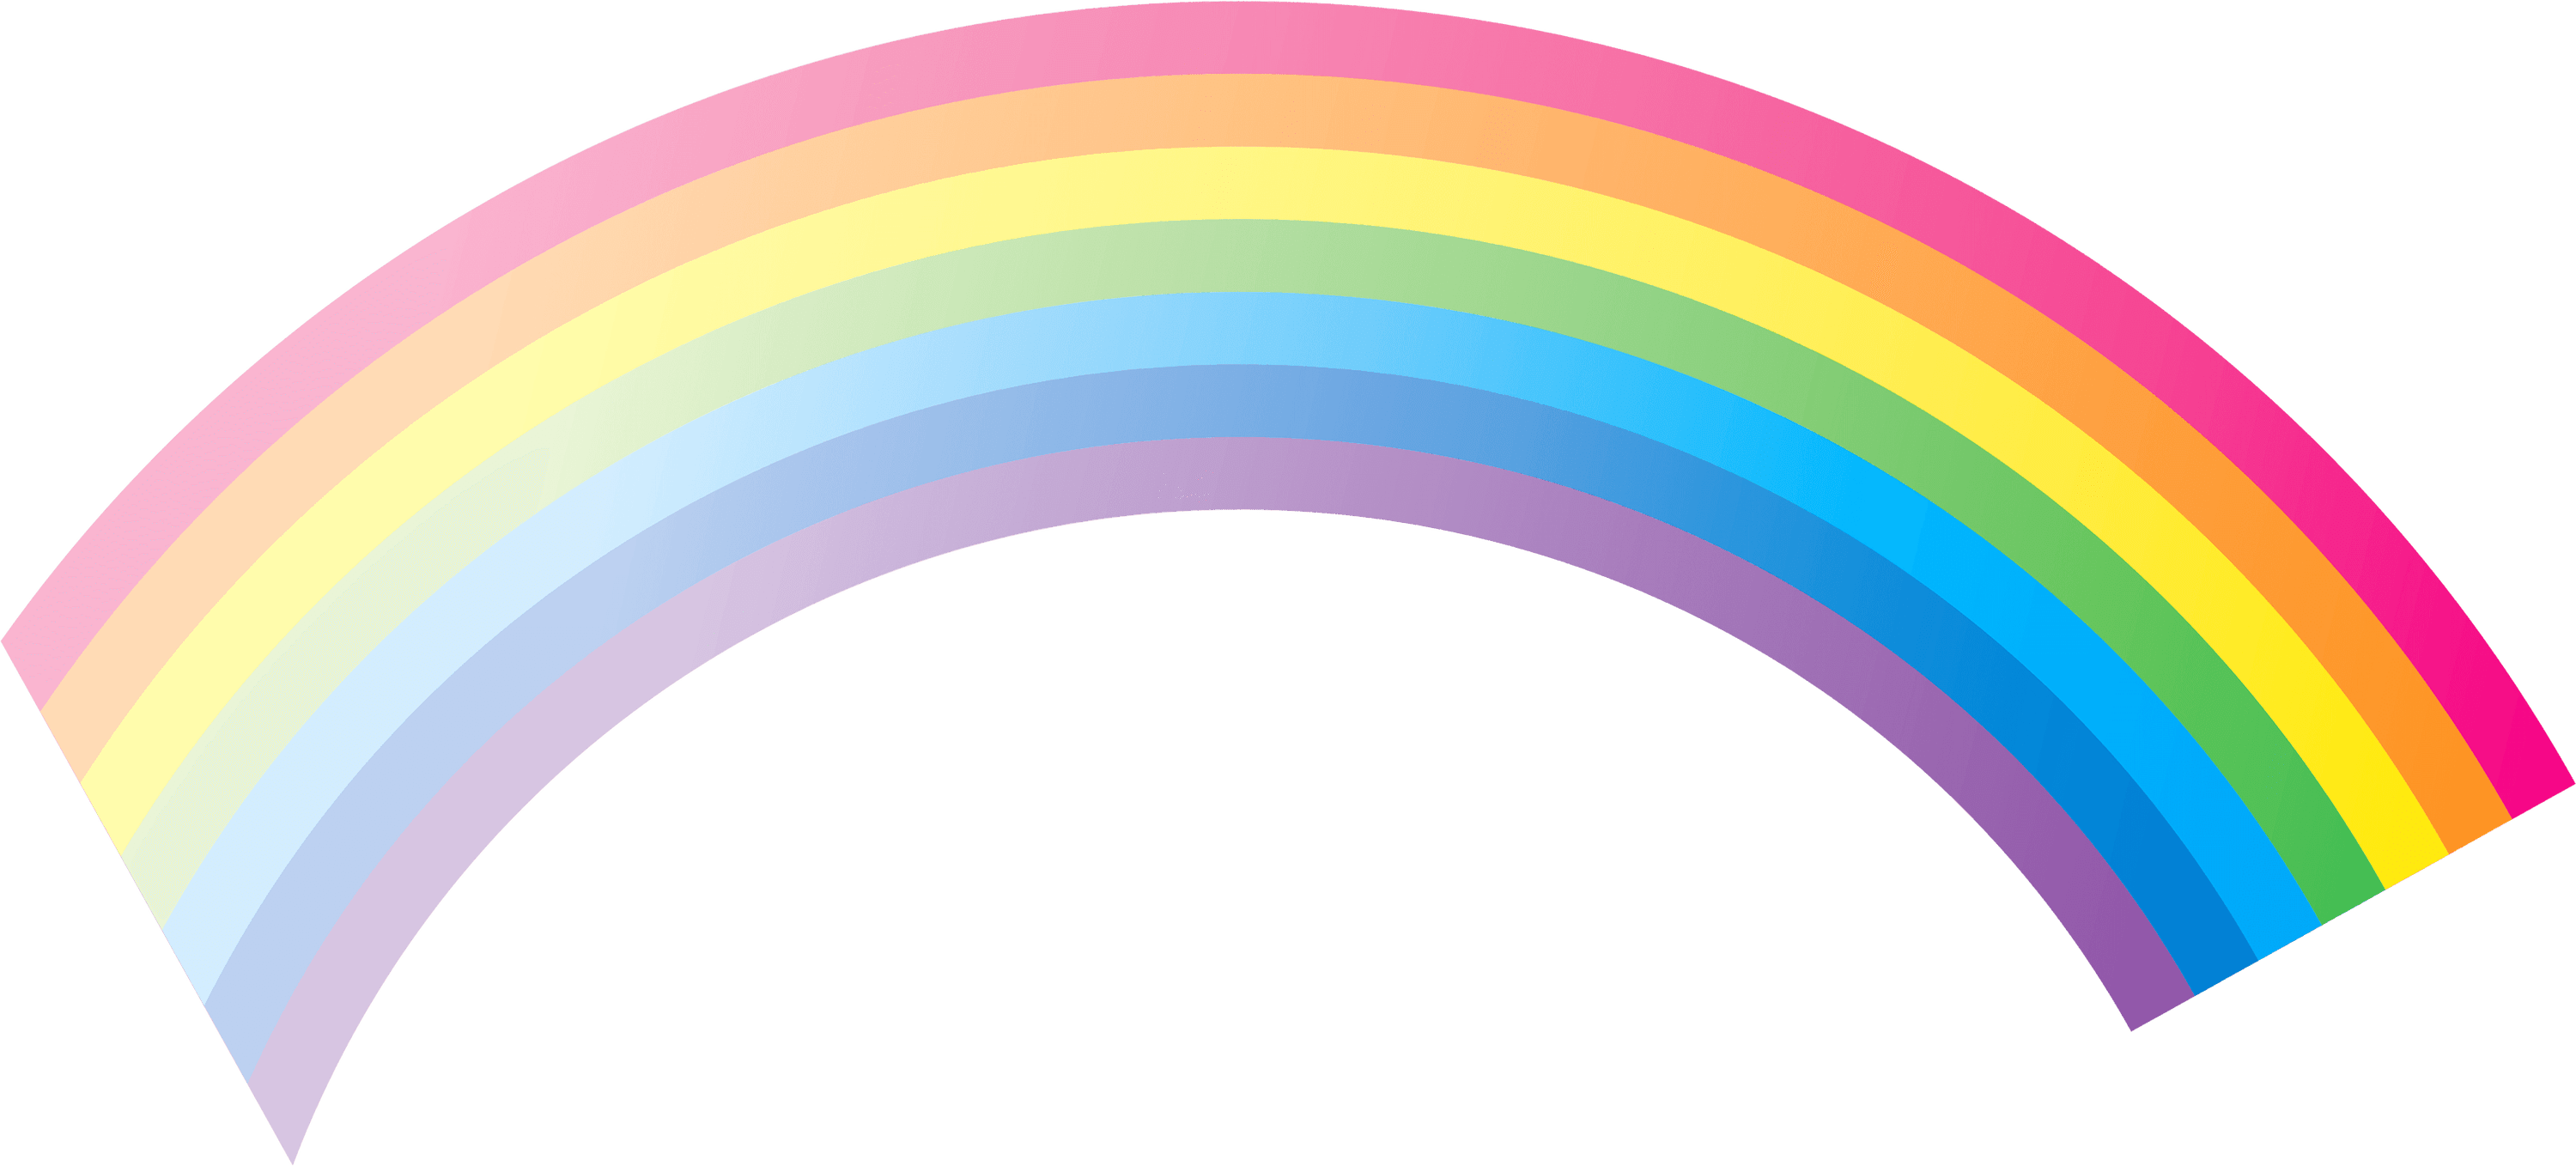 Flame clipart rainbow. Transparent png stickpng classic